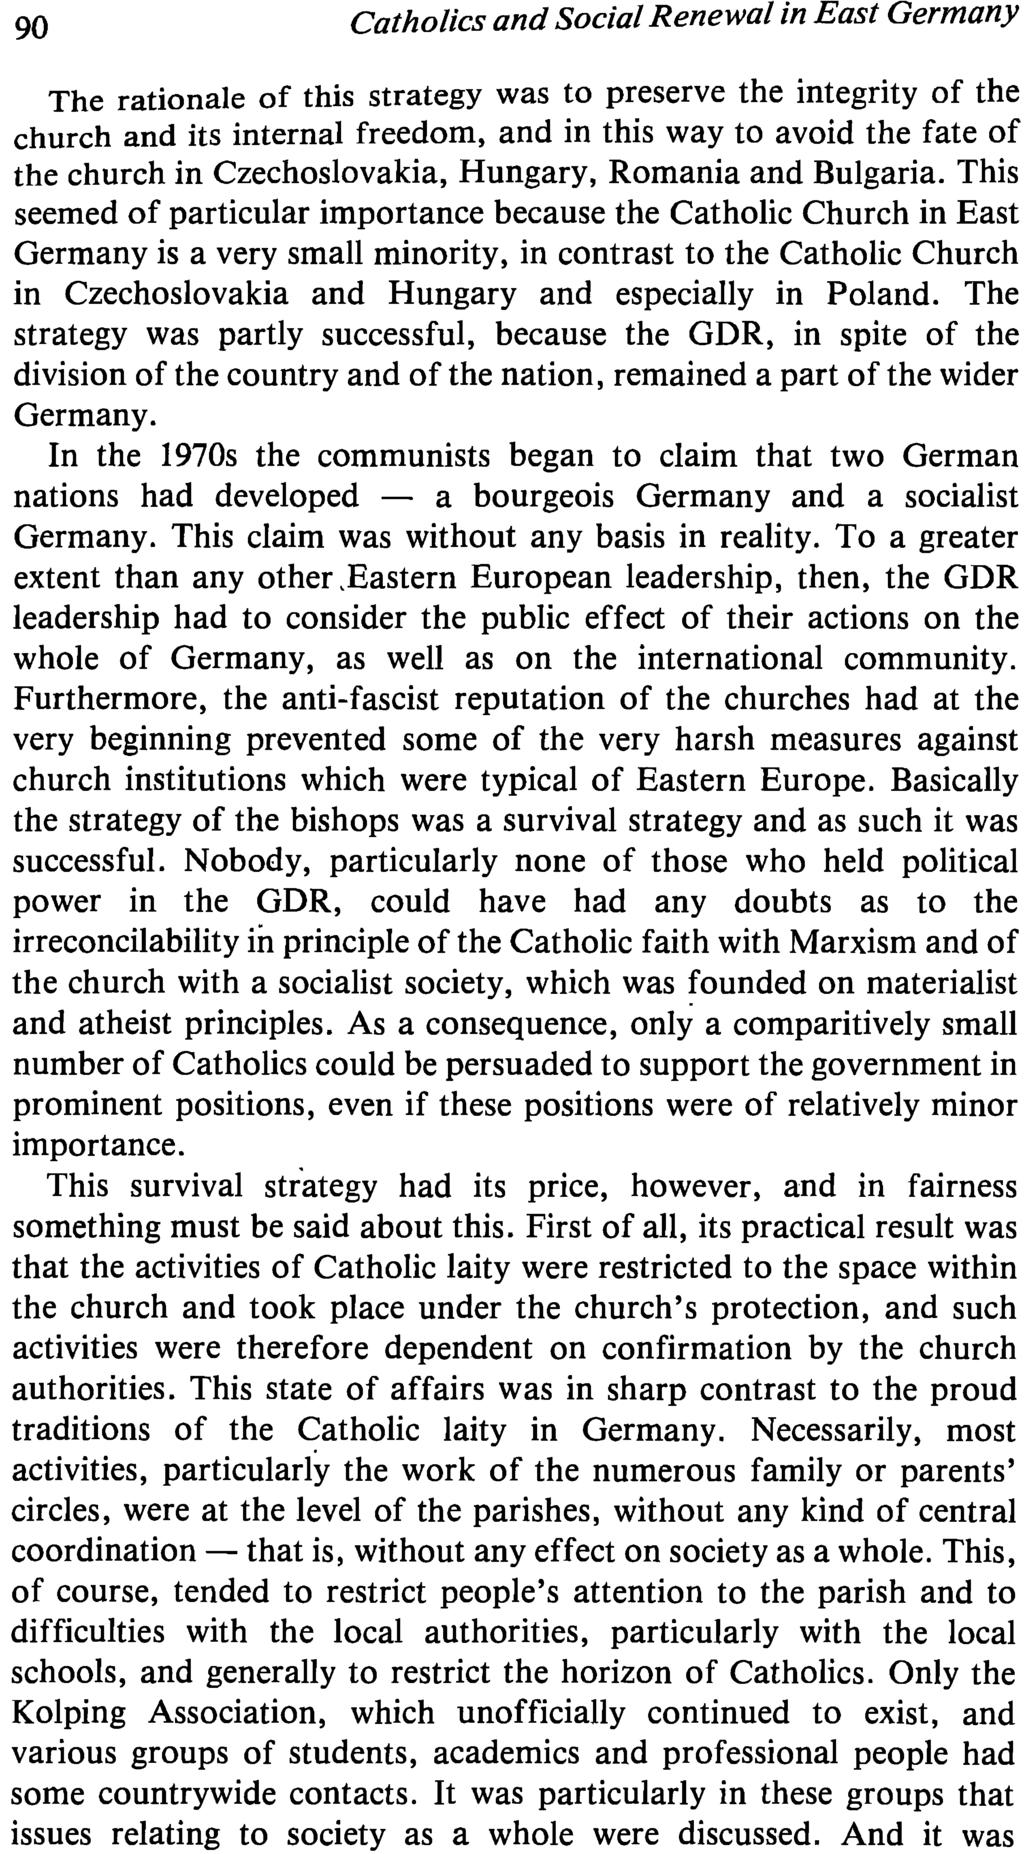 90 Catholics and Social Renewal in East Germany The rationale of this strategy was to preserve the integrity of the church and its internal freedom, and in this way to avoid the fate of the church in